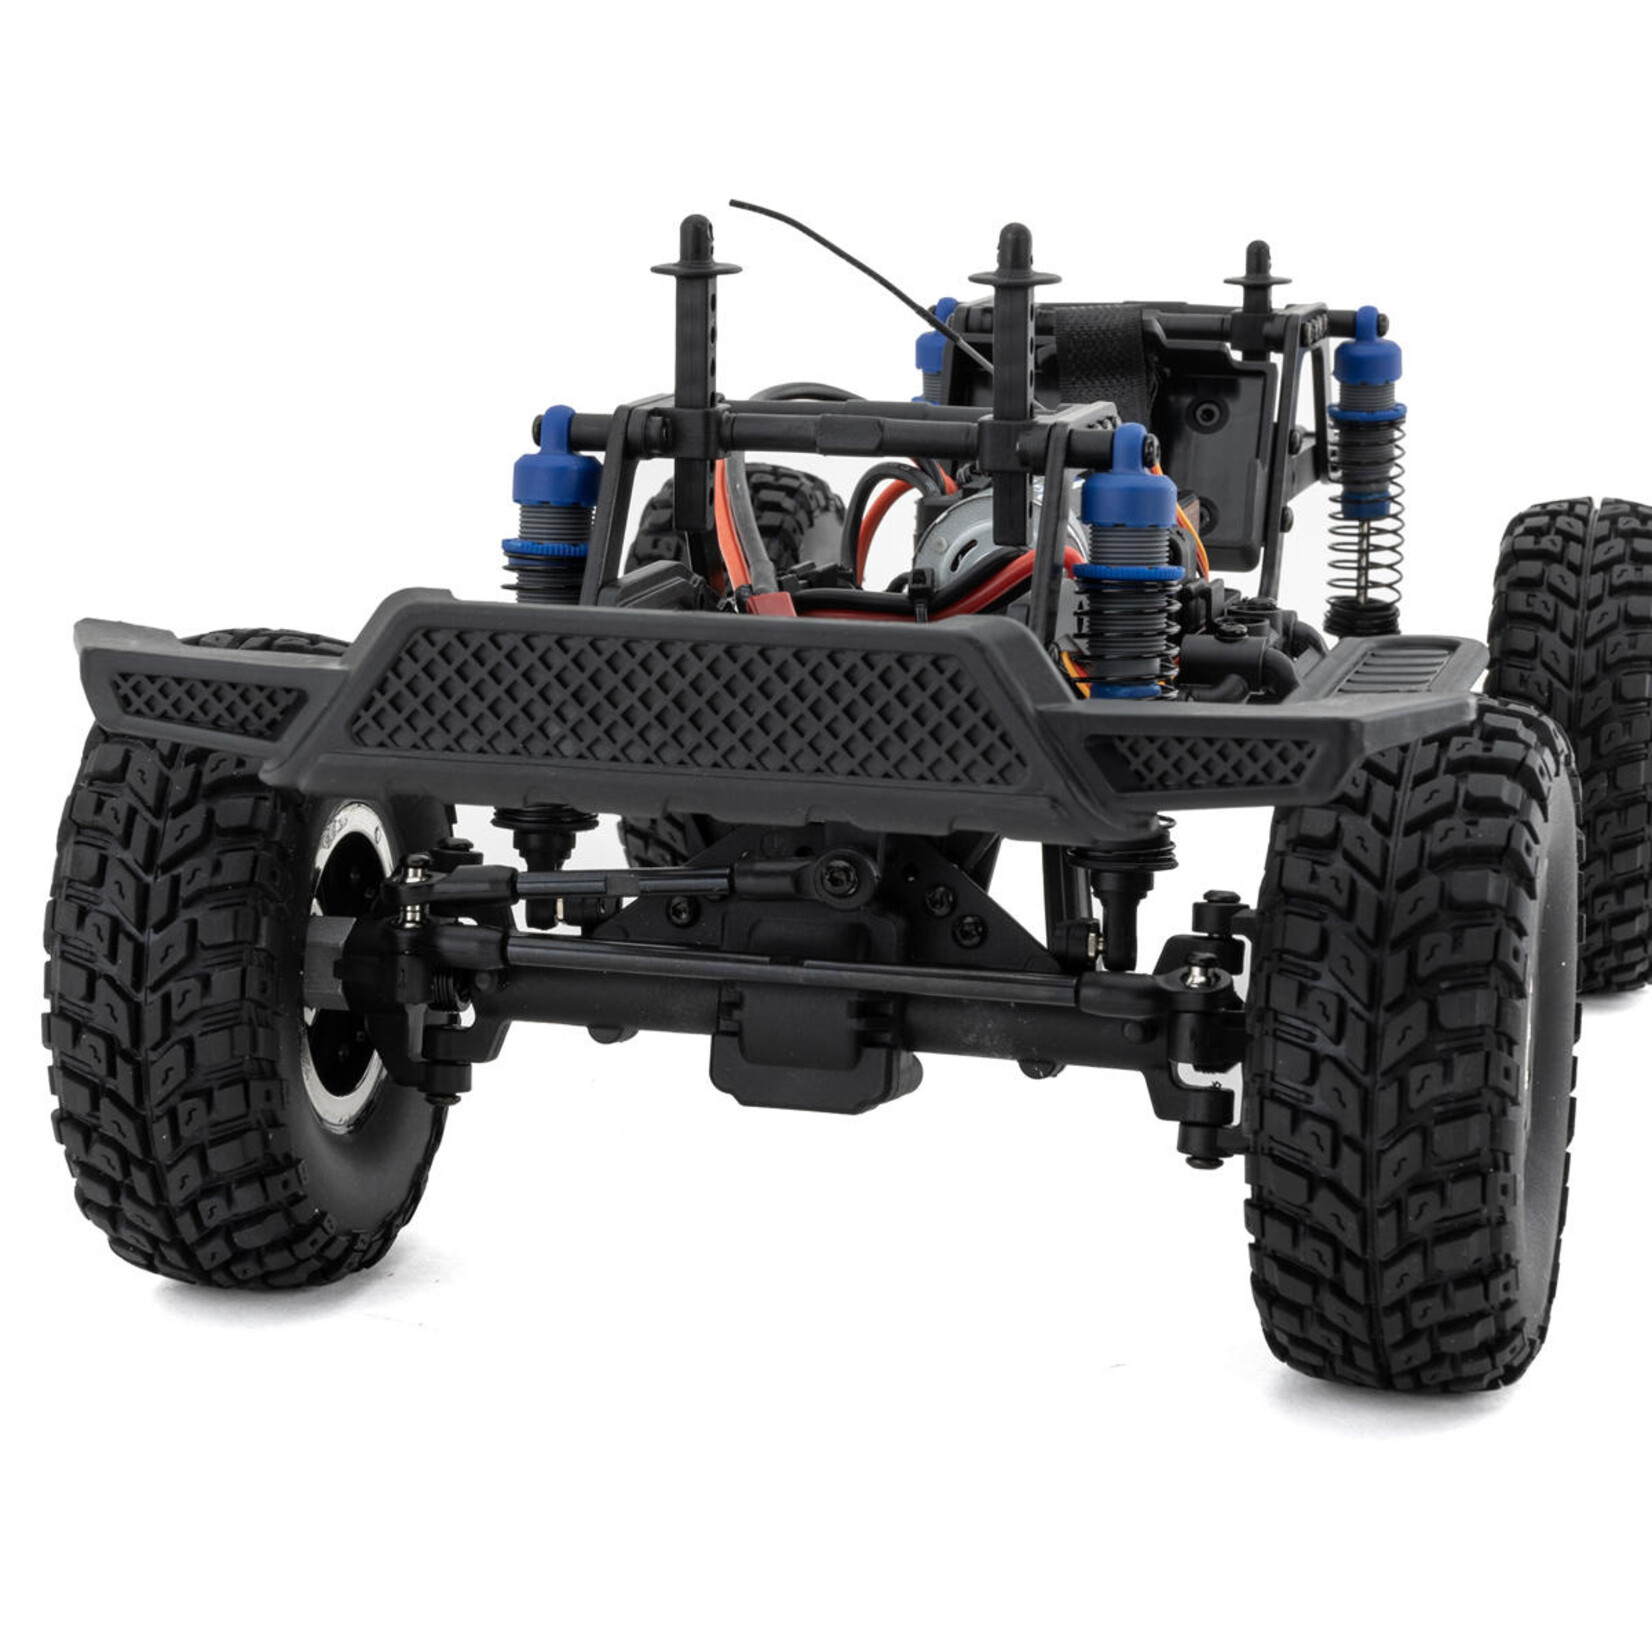 Element RC Element RC Enduro12 Sendero 1/12 4WD RTR Scale Mini Trail Truck w/2.4GHz Radio, Battery & Charger #40009C